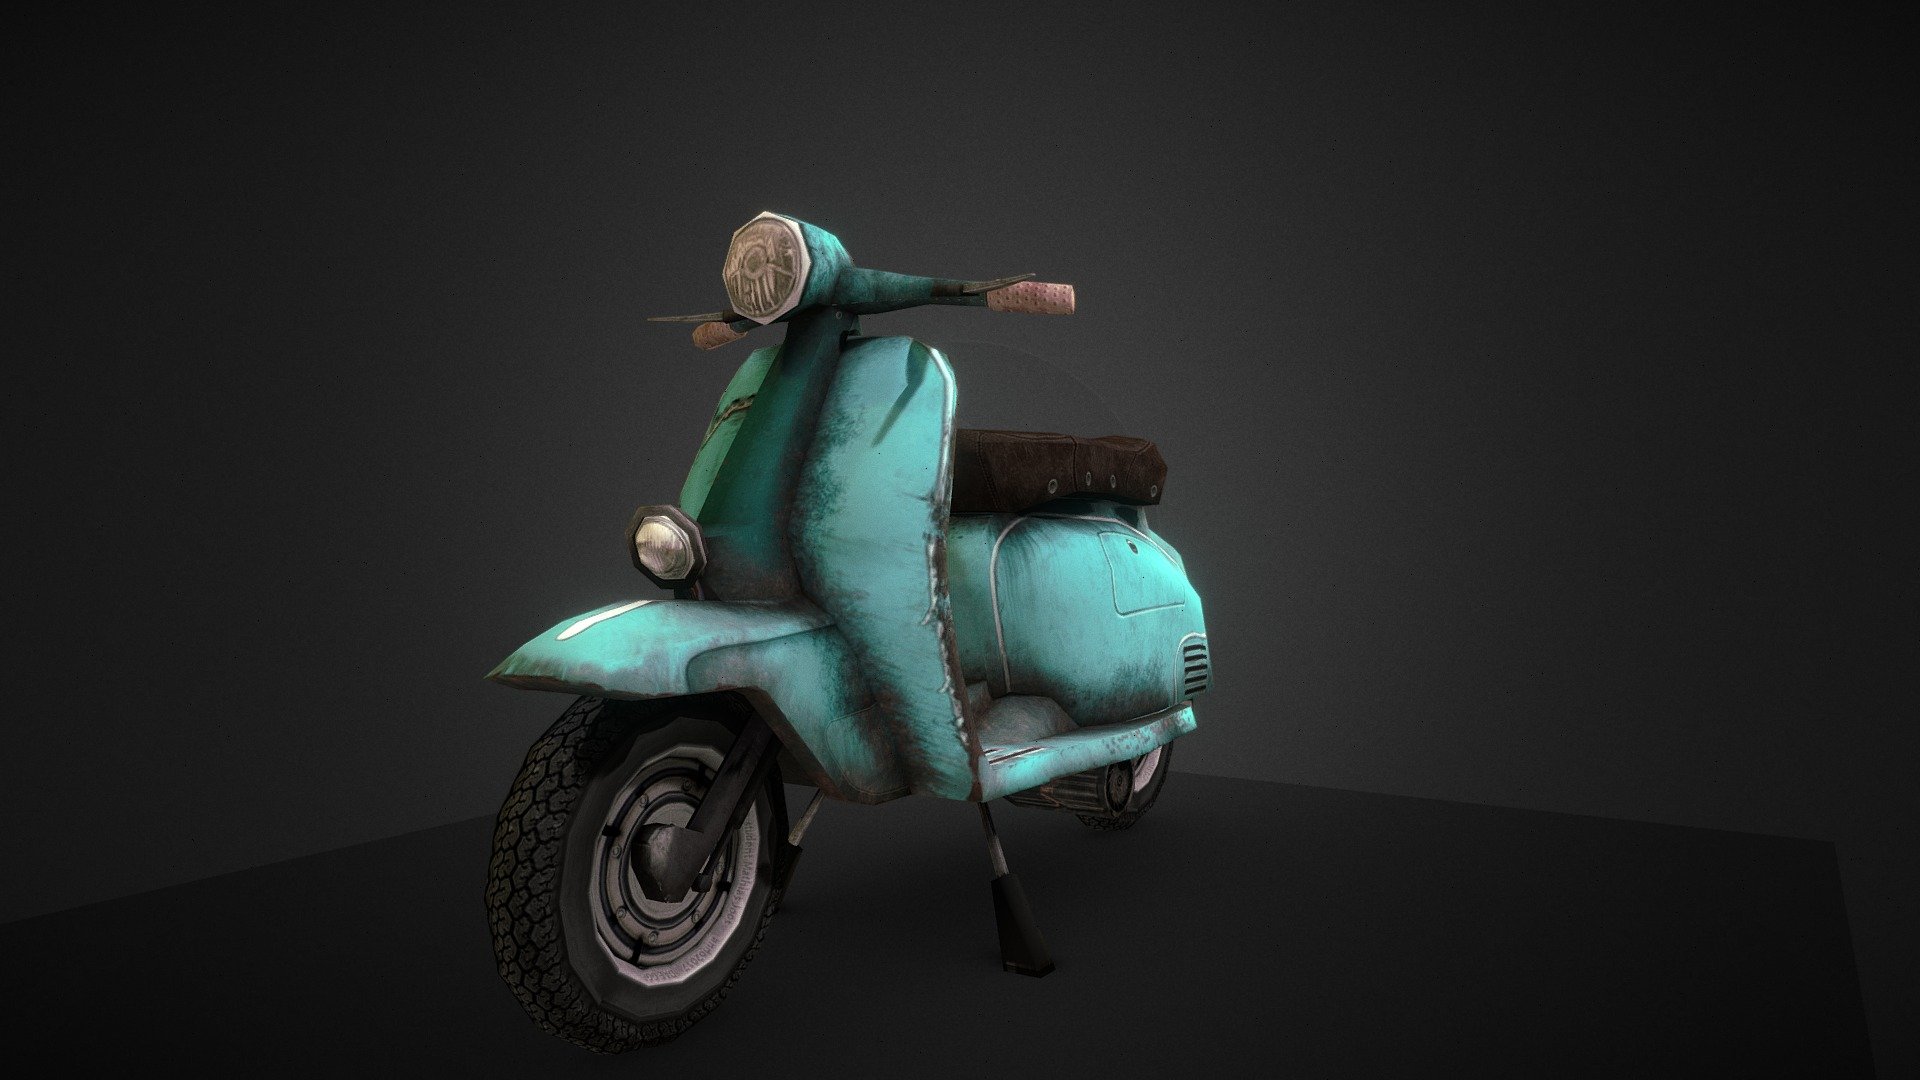 Vespa Prop
Low poly, diffuse only, inspired by half life-like graphics.

Modeled after a retro vespa, electric, old and dusty, has seen better days.

Software used: 
Blender 3d for modeling,  UV-unwrapping
substance painter and Photoshop CC for texturing

Some images used in the texture may be copyrighted, 
this model is for educational purpose only, it was an exercise &hellip; 

Please feel free to critique and comment, i would greatly appreciate it 3d model